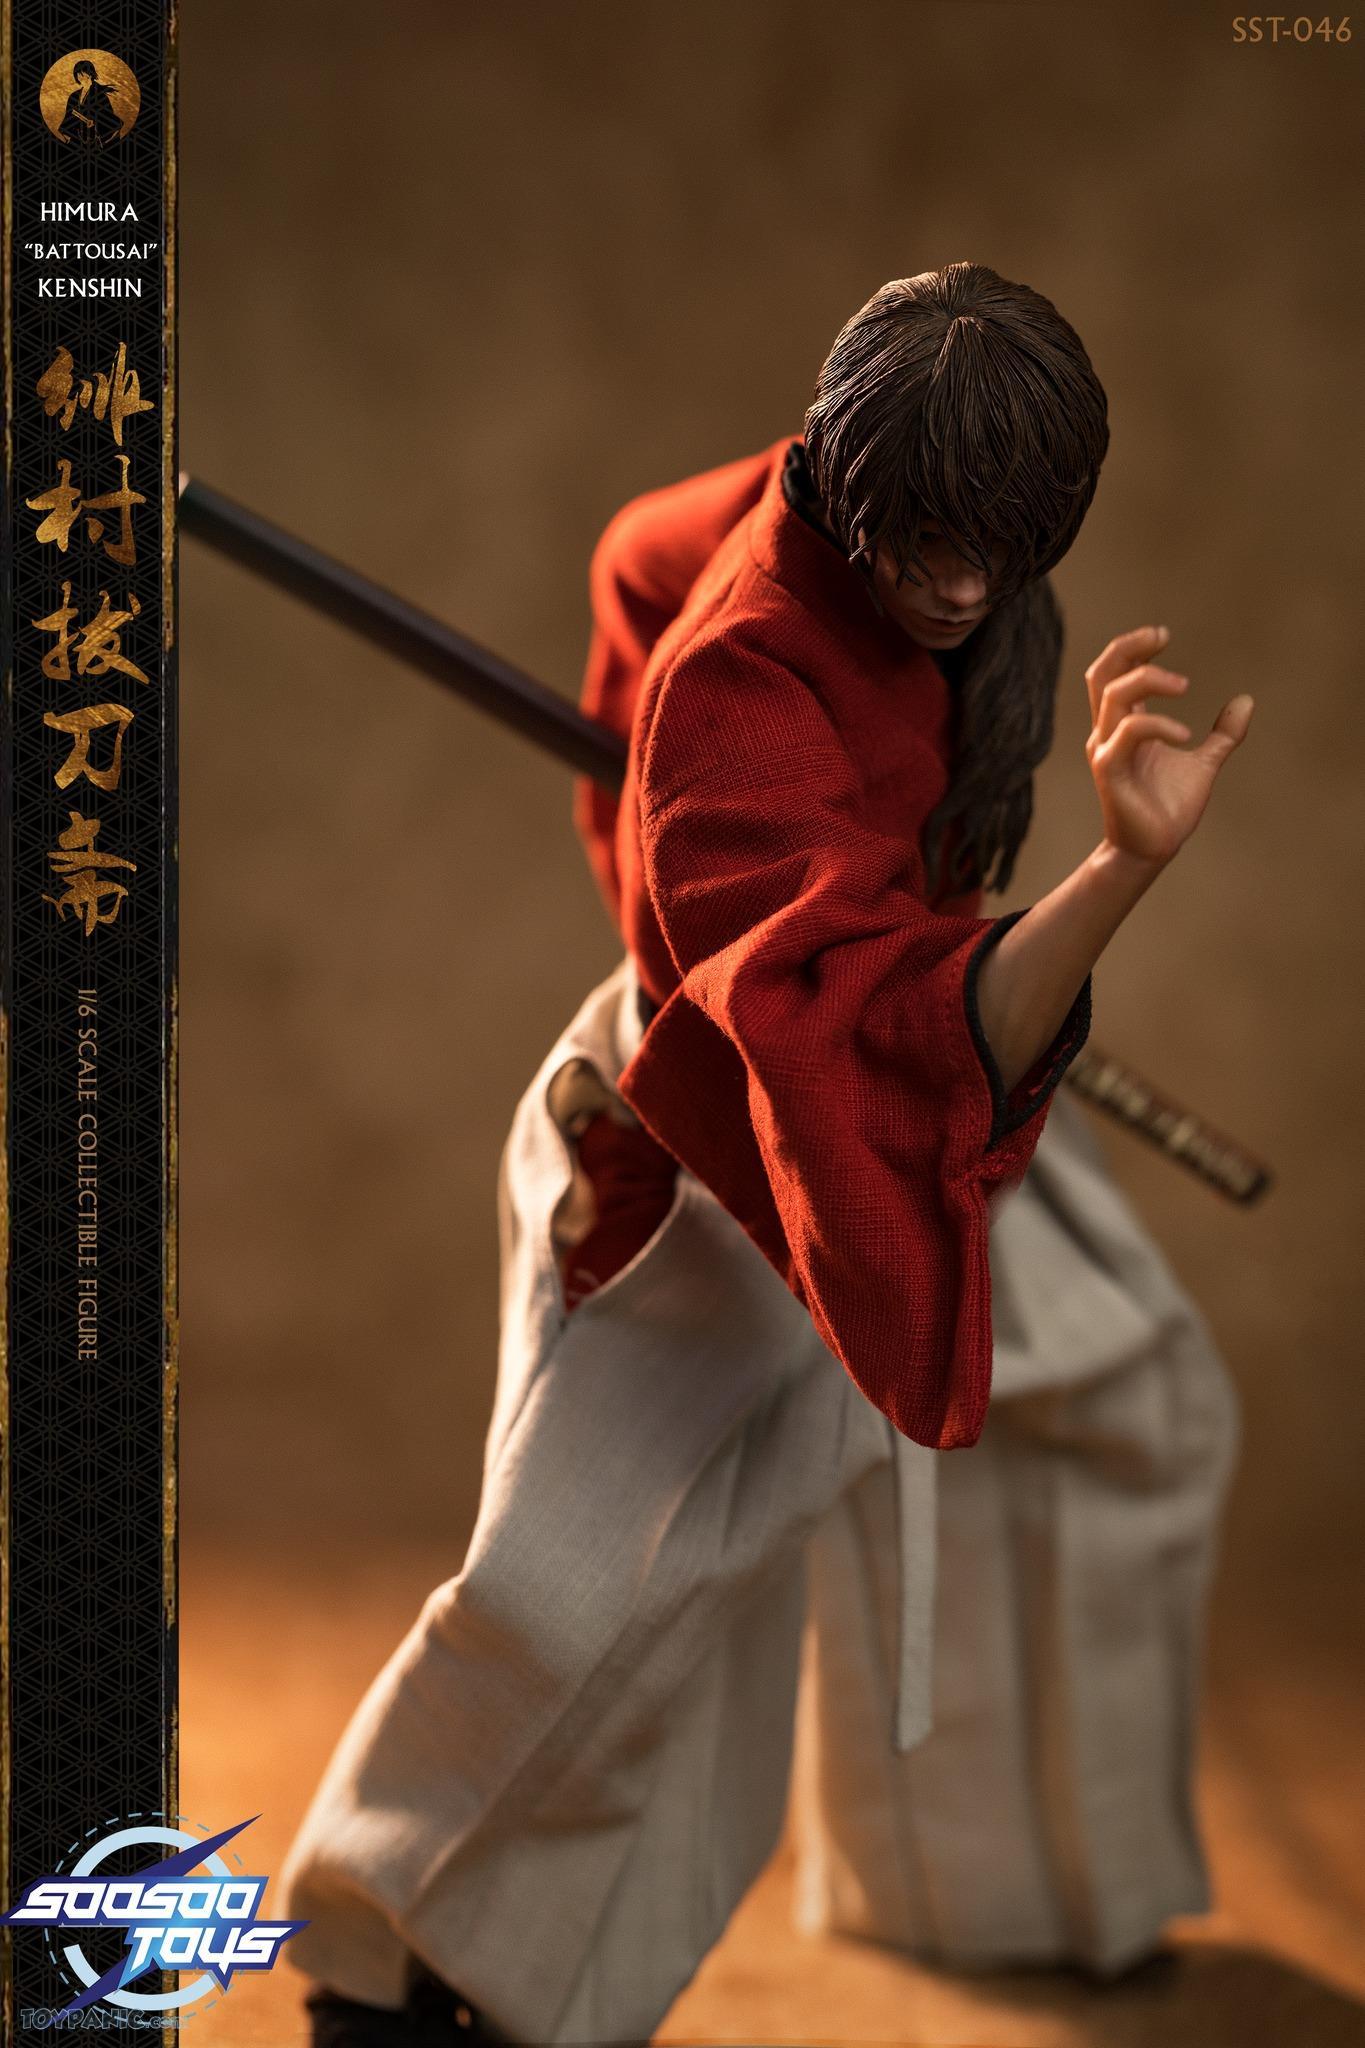 NEW PRODUCT: 1/6 scale Rurouni Kenshin Collectible Figure from SooSooToys 712202251233PM_9601394